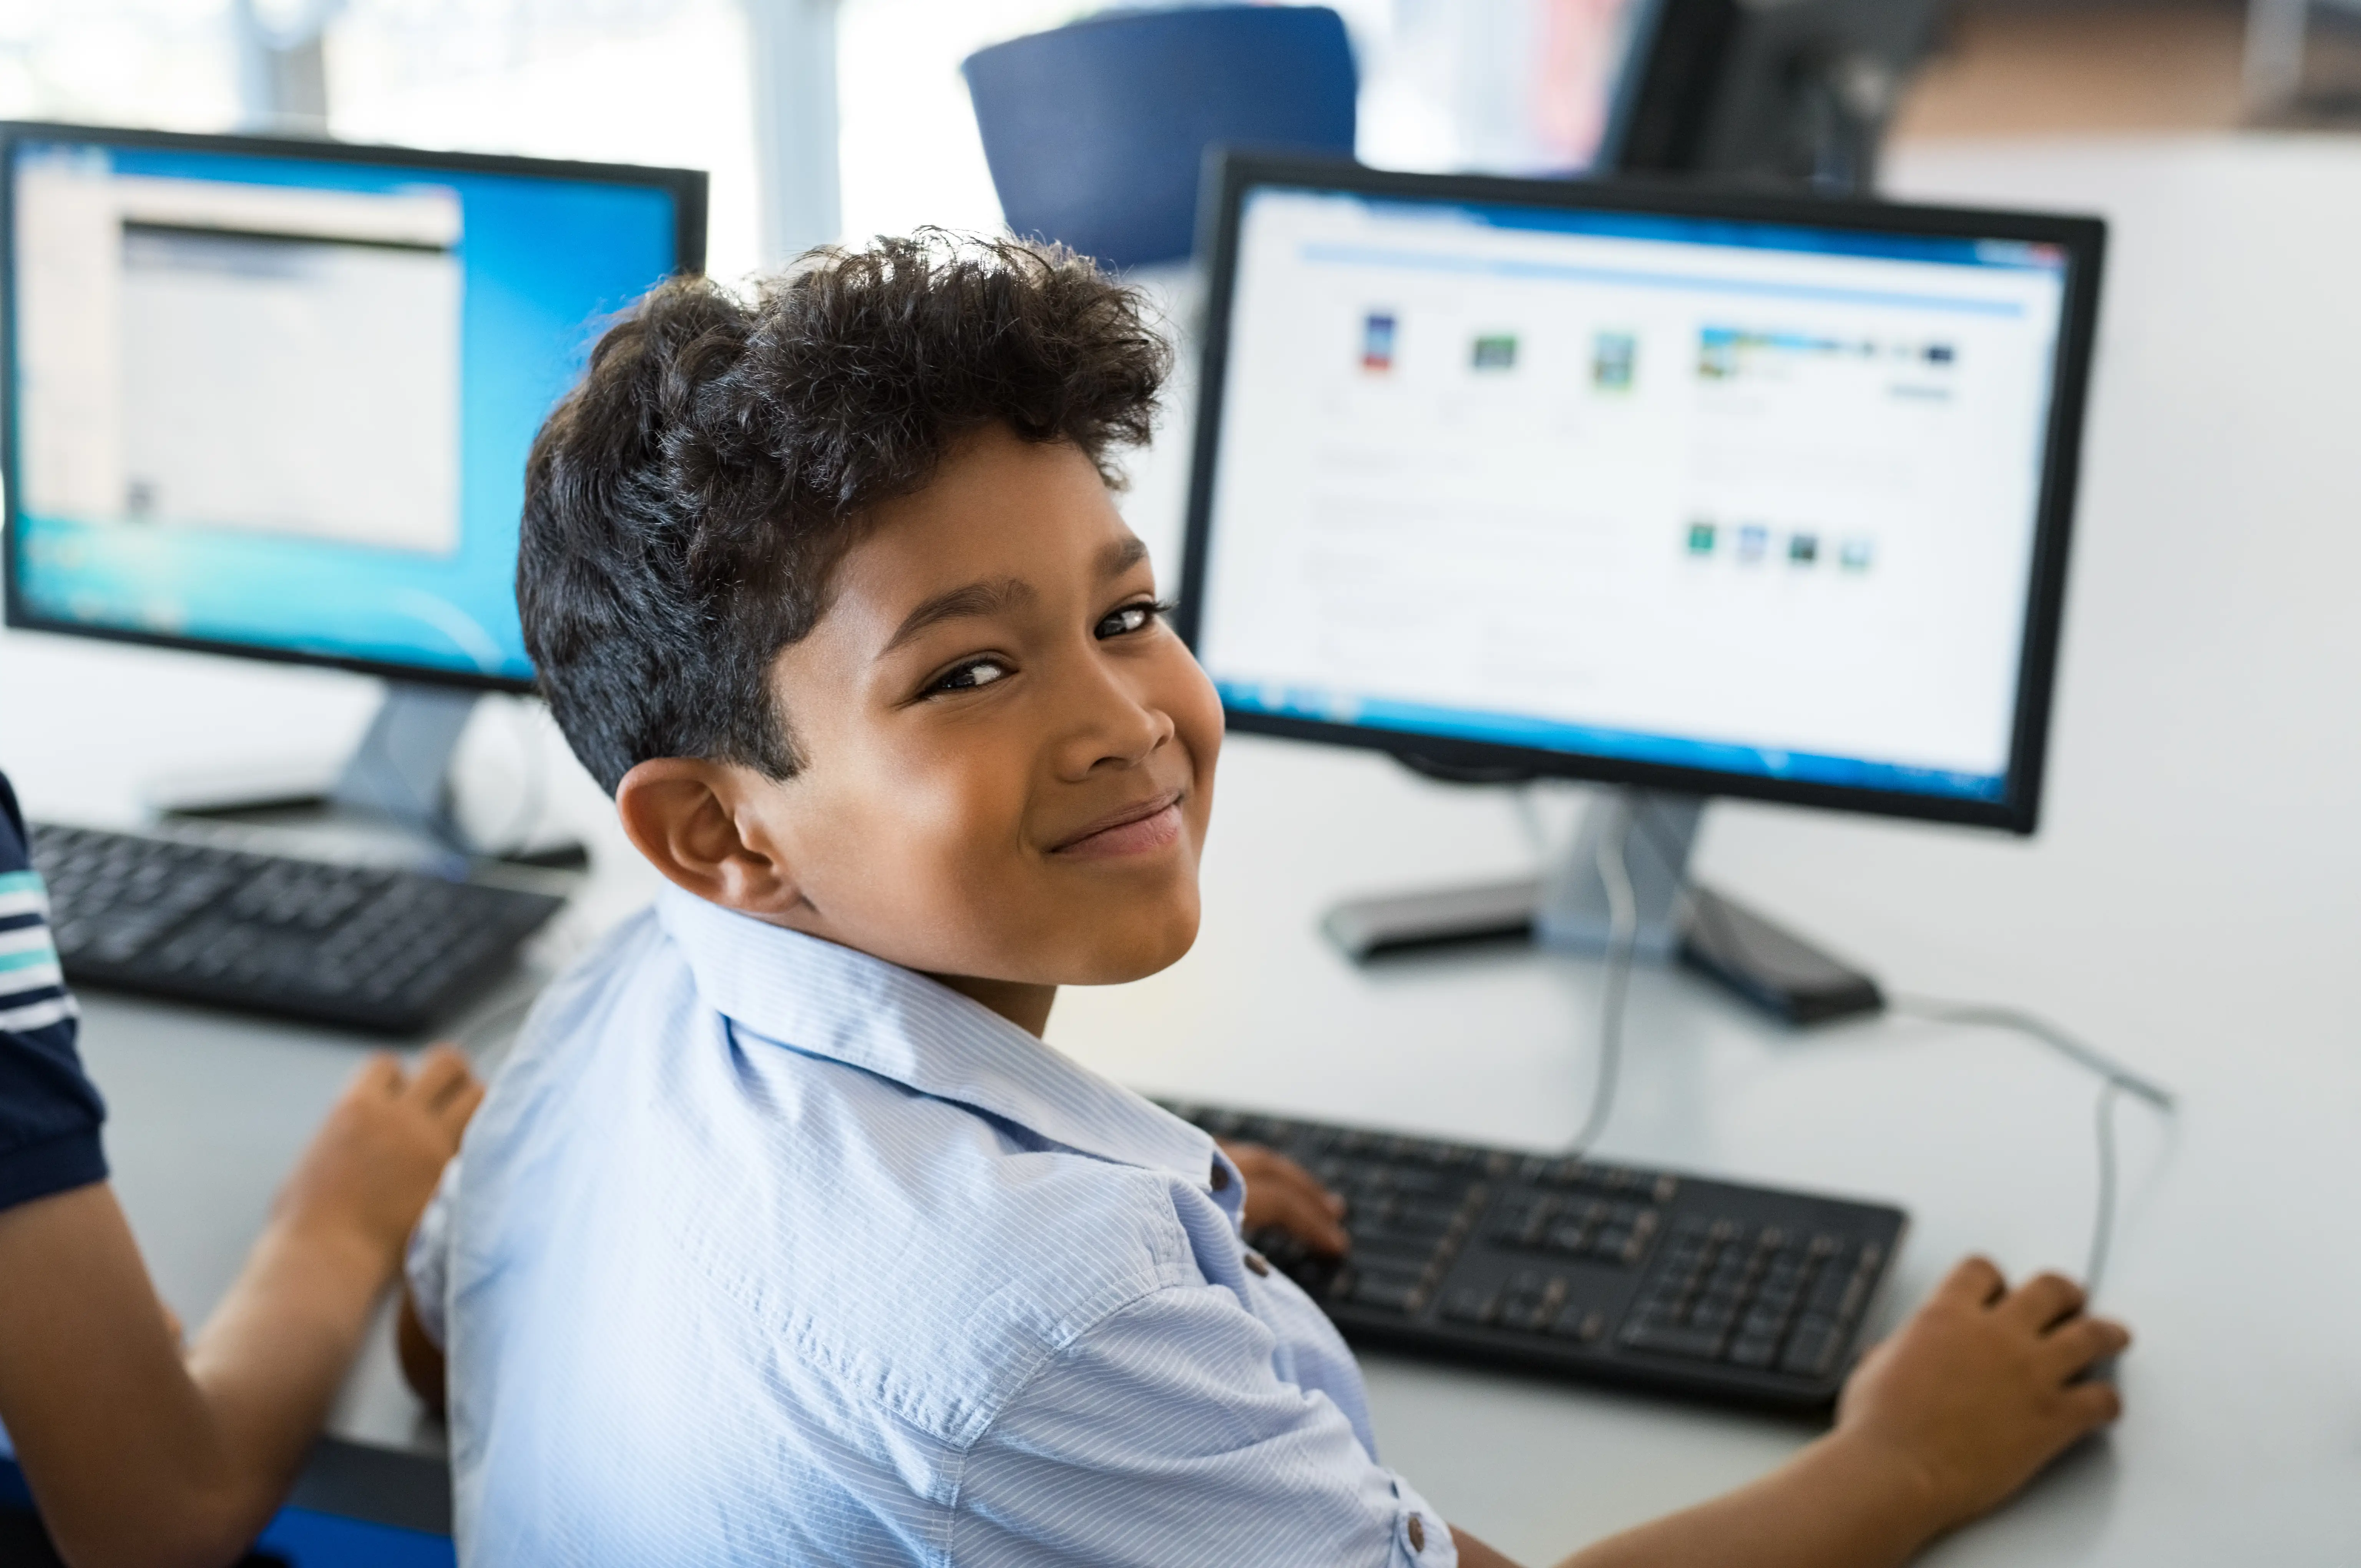 Boy smiling while at computer